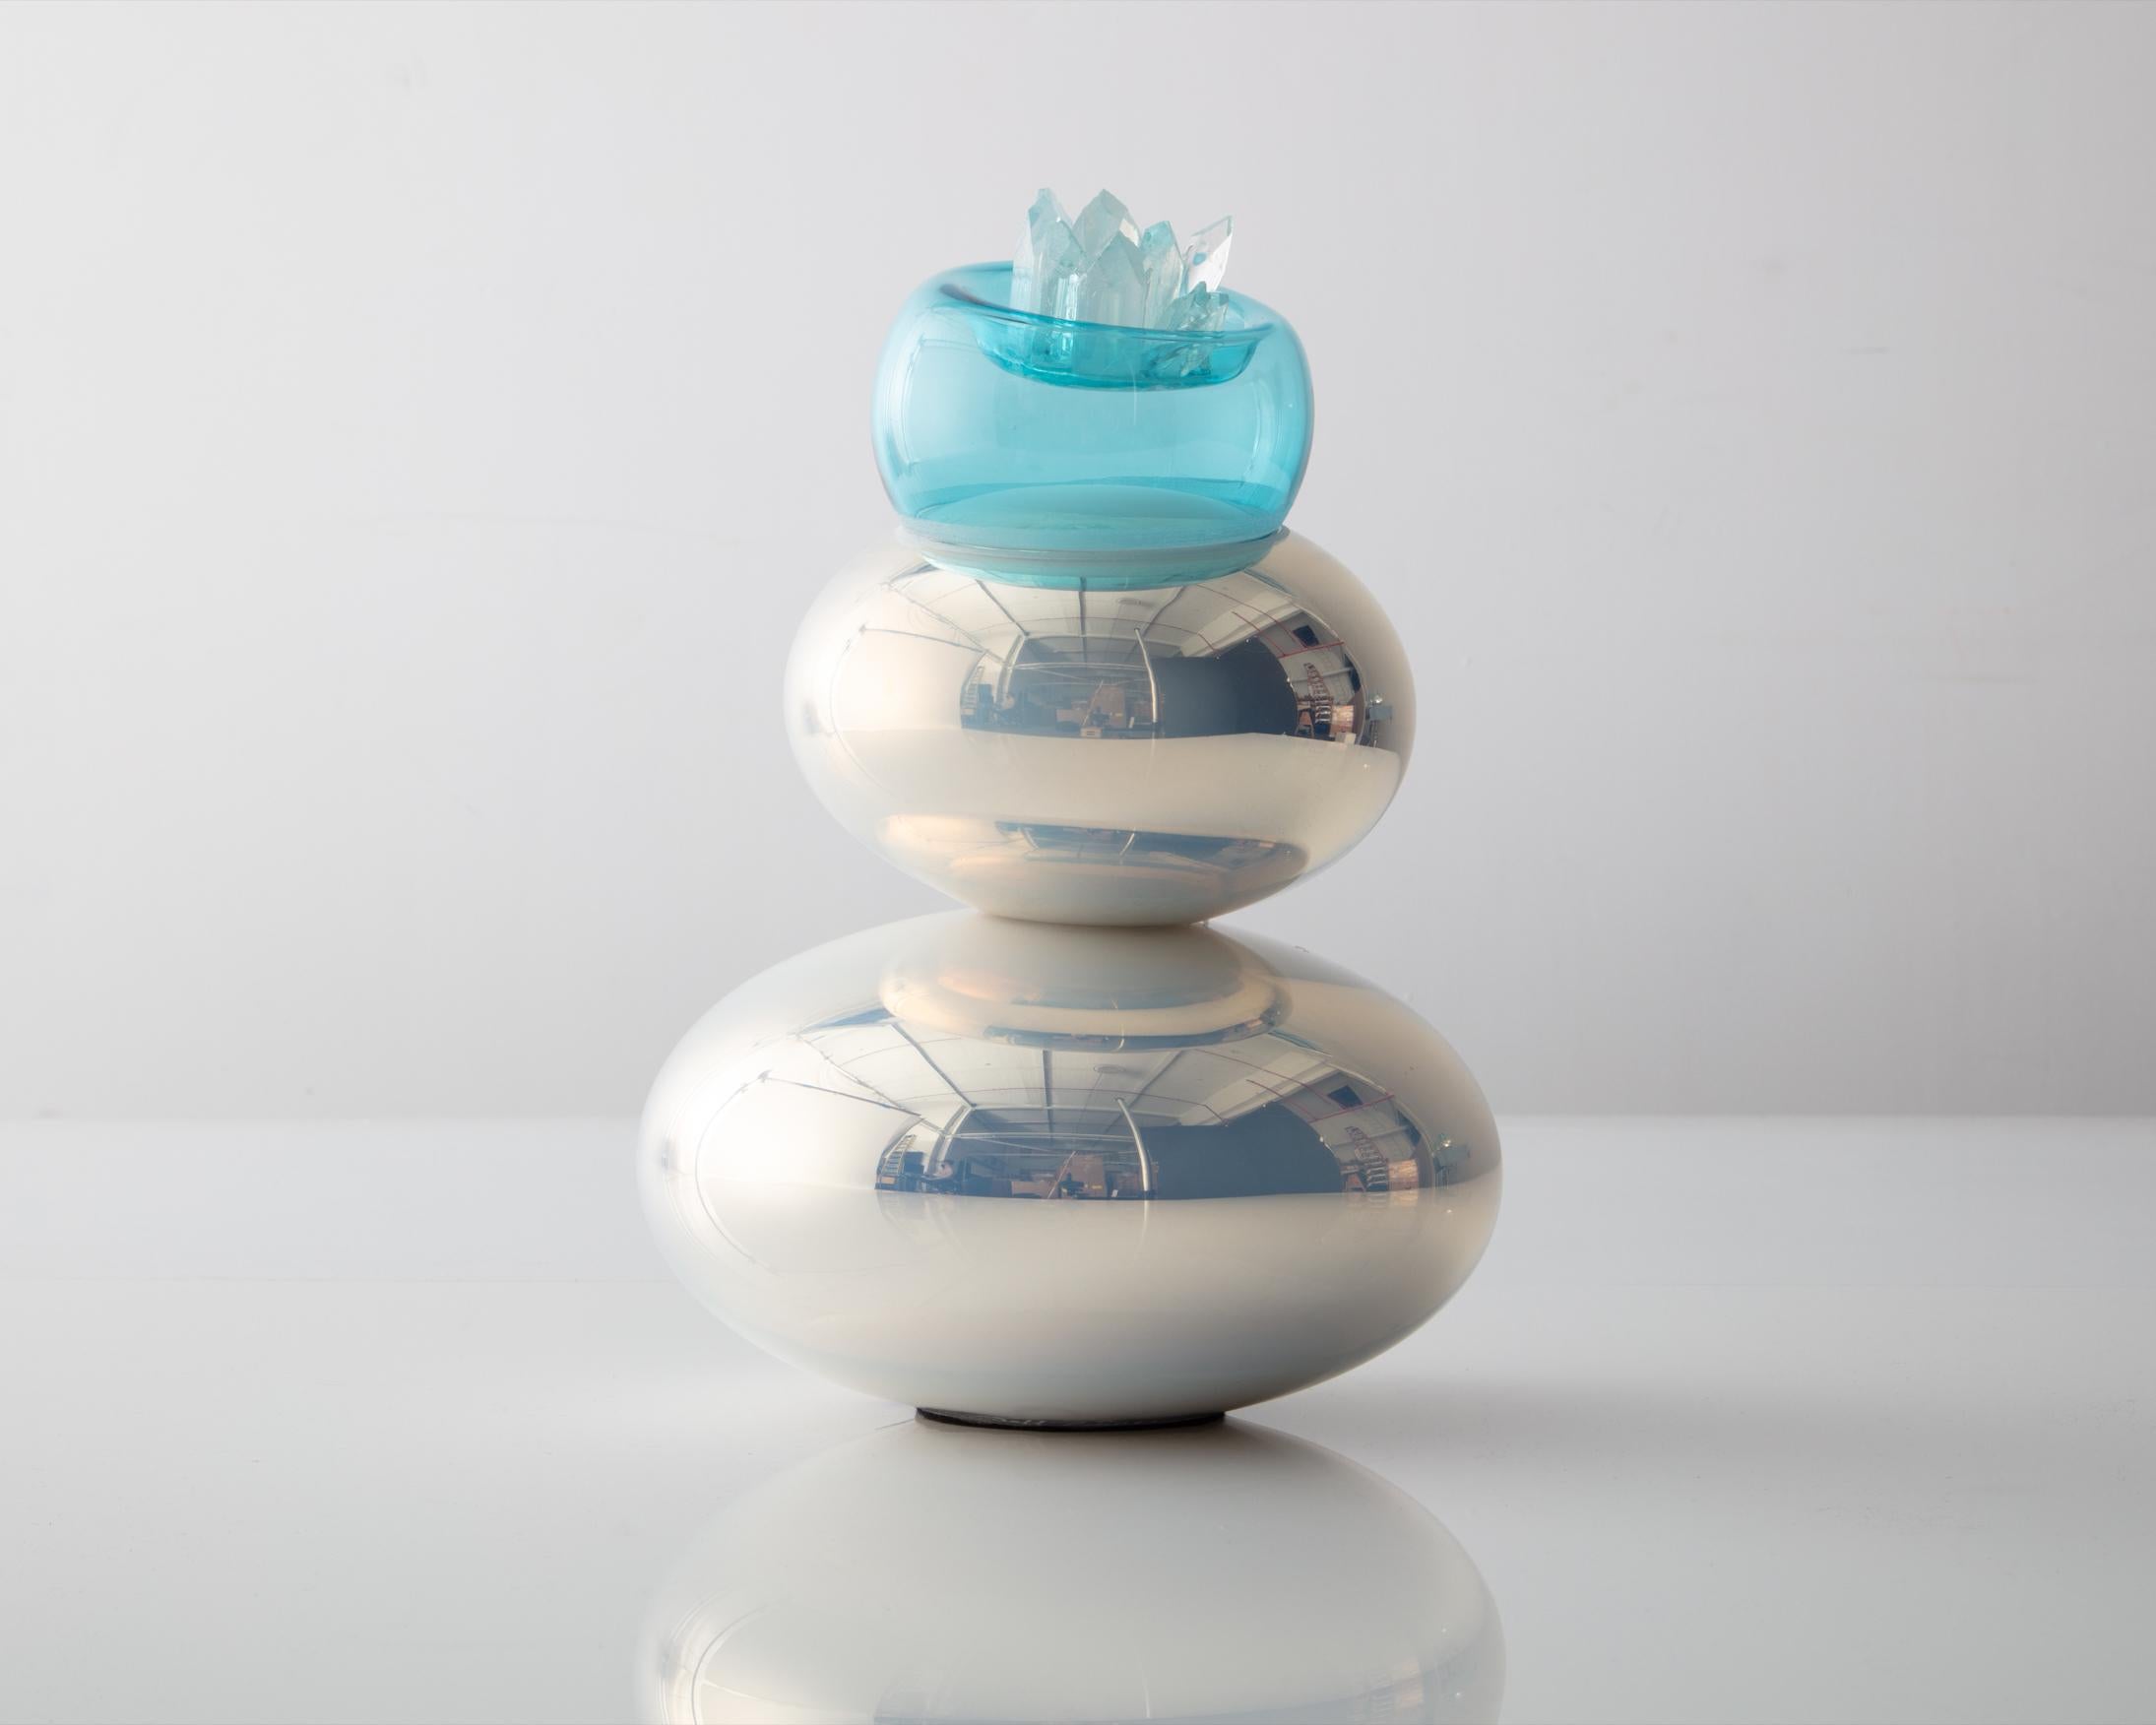 Three-tiered stacked bubble sculpture. Mirrored silver and turquoise applied glass crystals with felt pad. Designed and made by Jeff Zimmerman, USA, 2021.